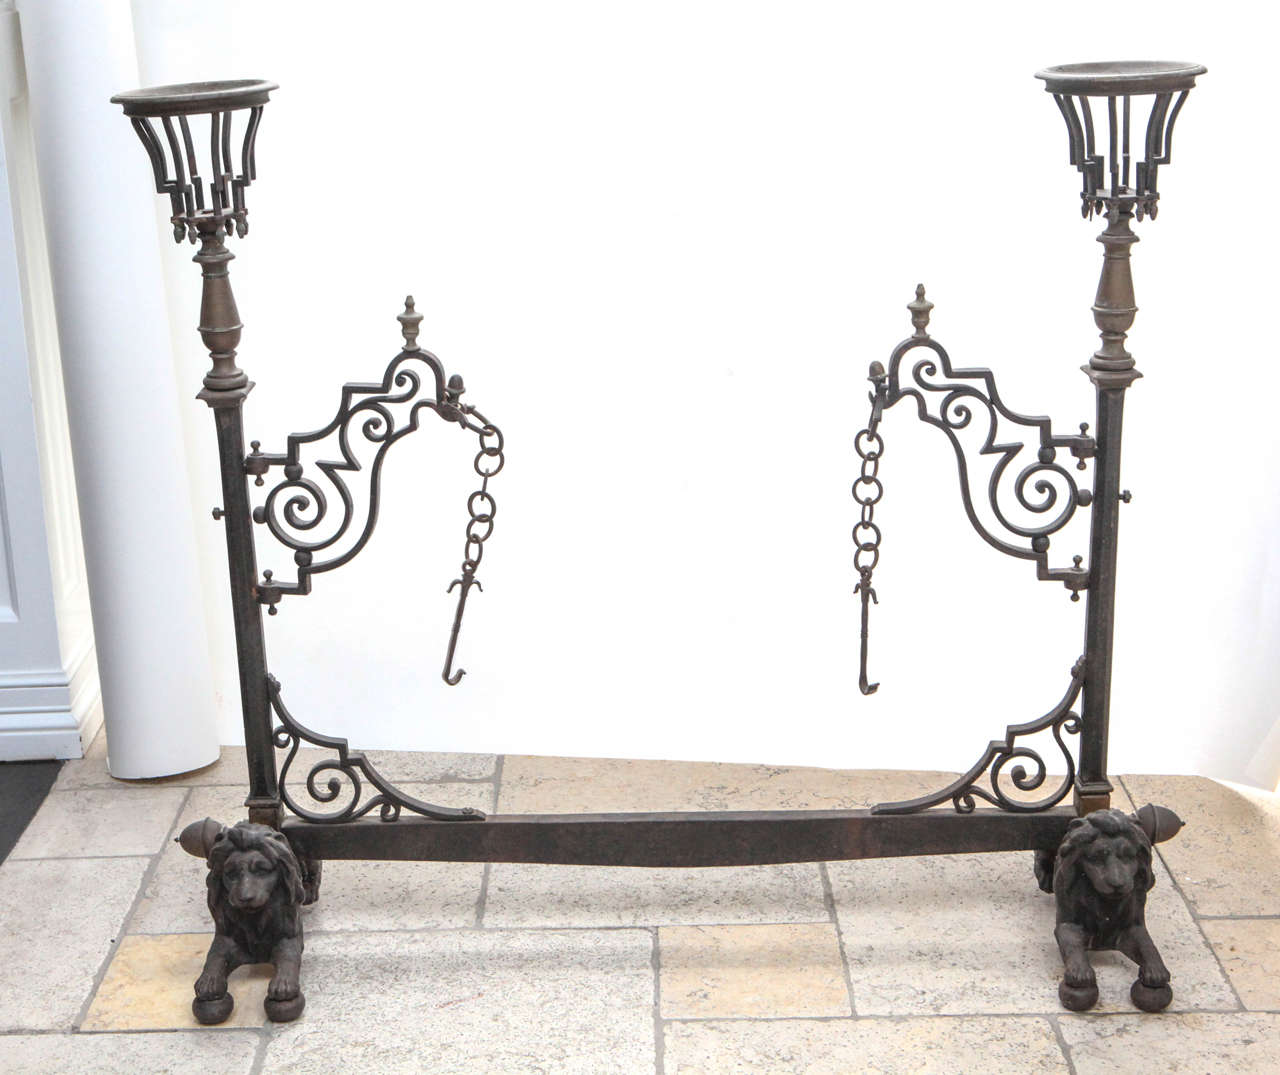 Late 19th century French bronze and wrought iron fireplace stand with lion base, acorn finial and 